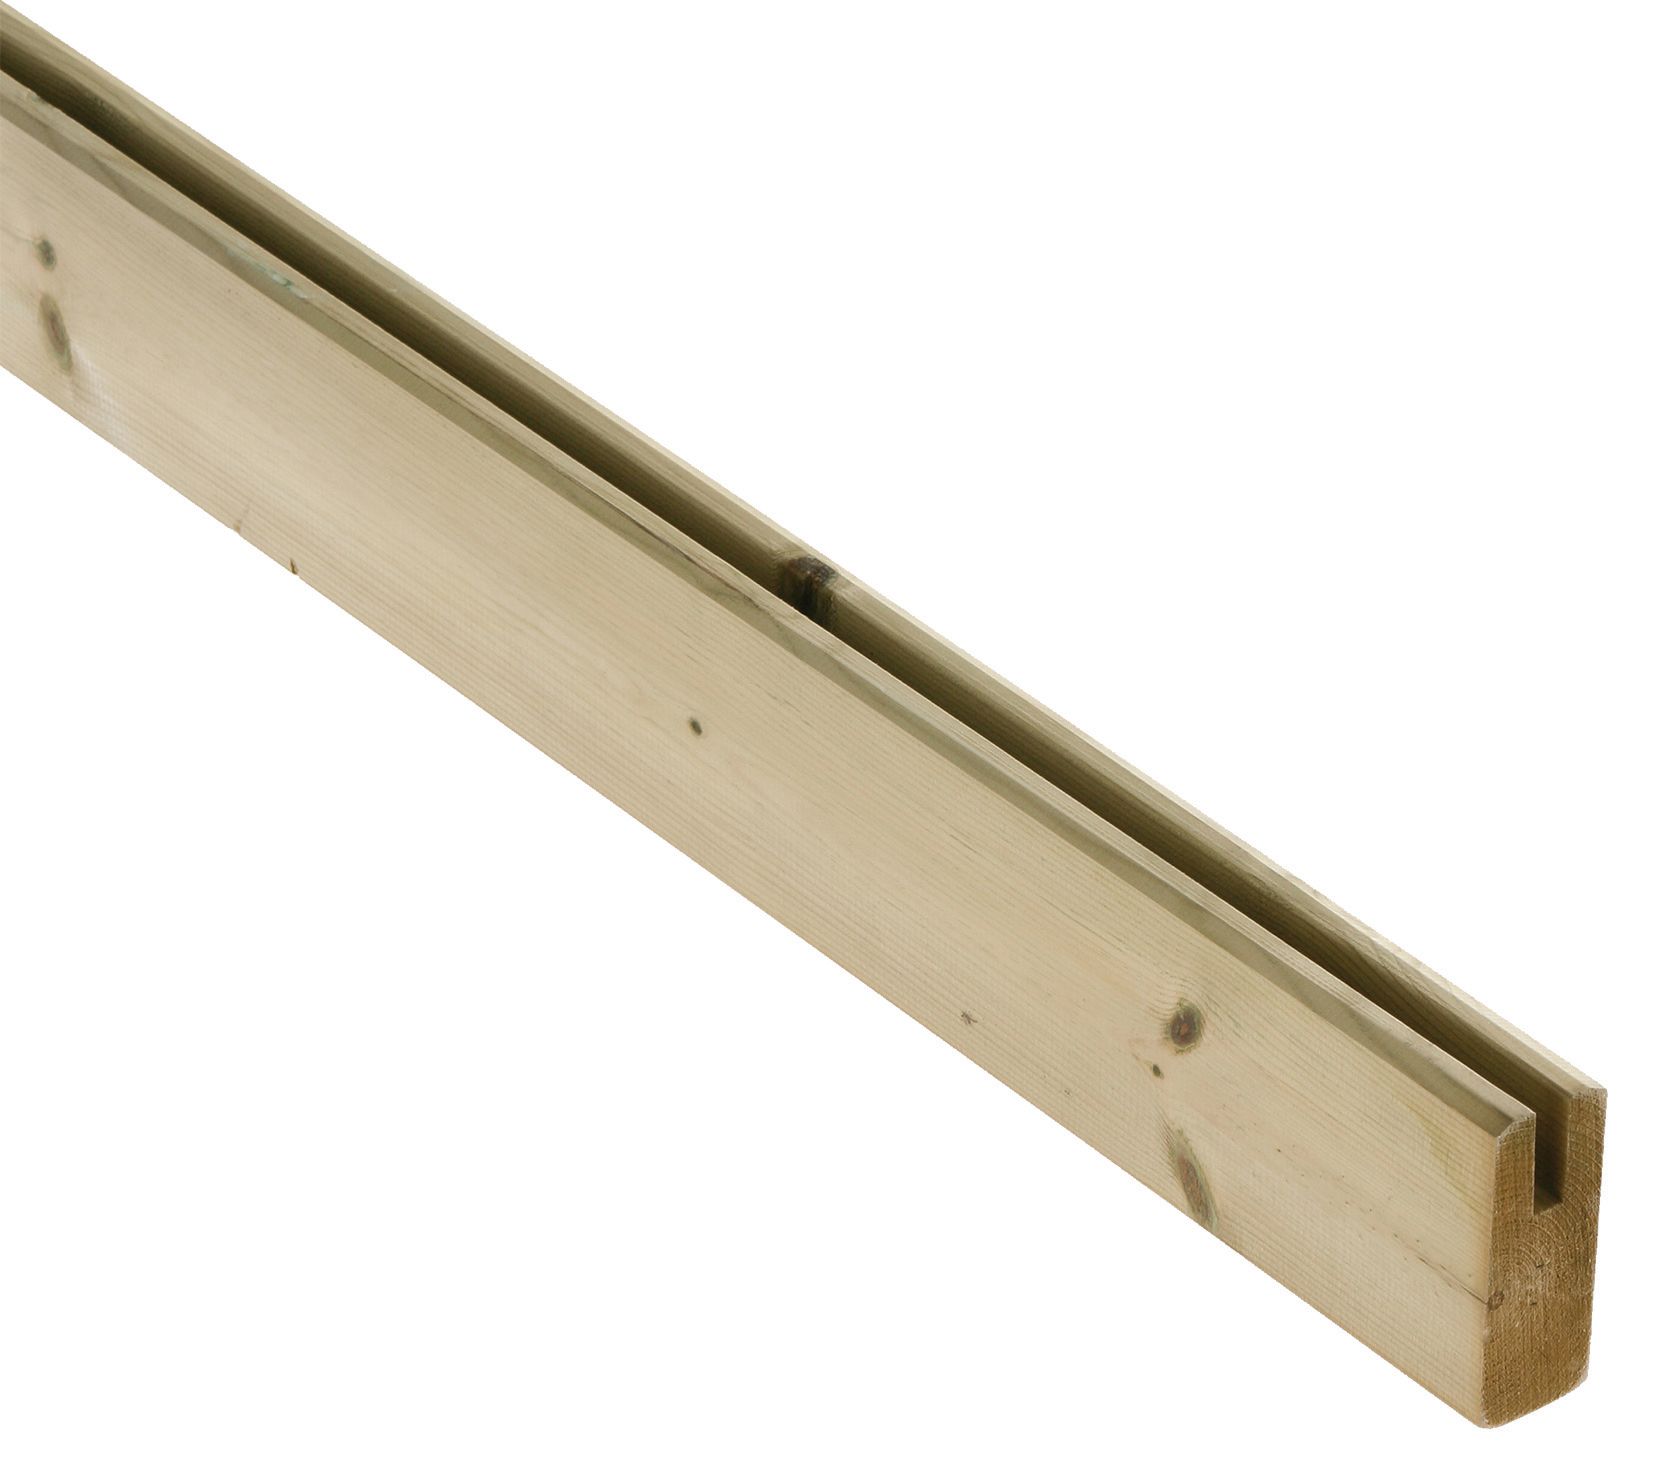 Image of Wickes Slotted Deck Rail for Glass Balusters - 1800mm